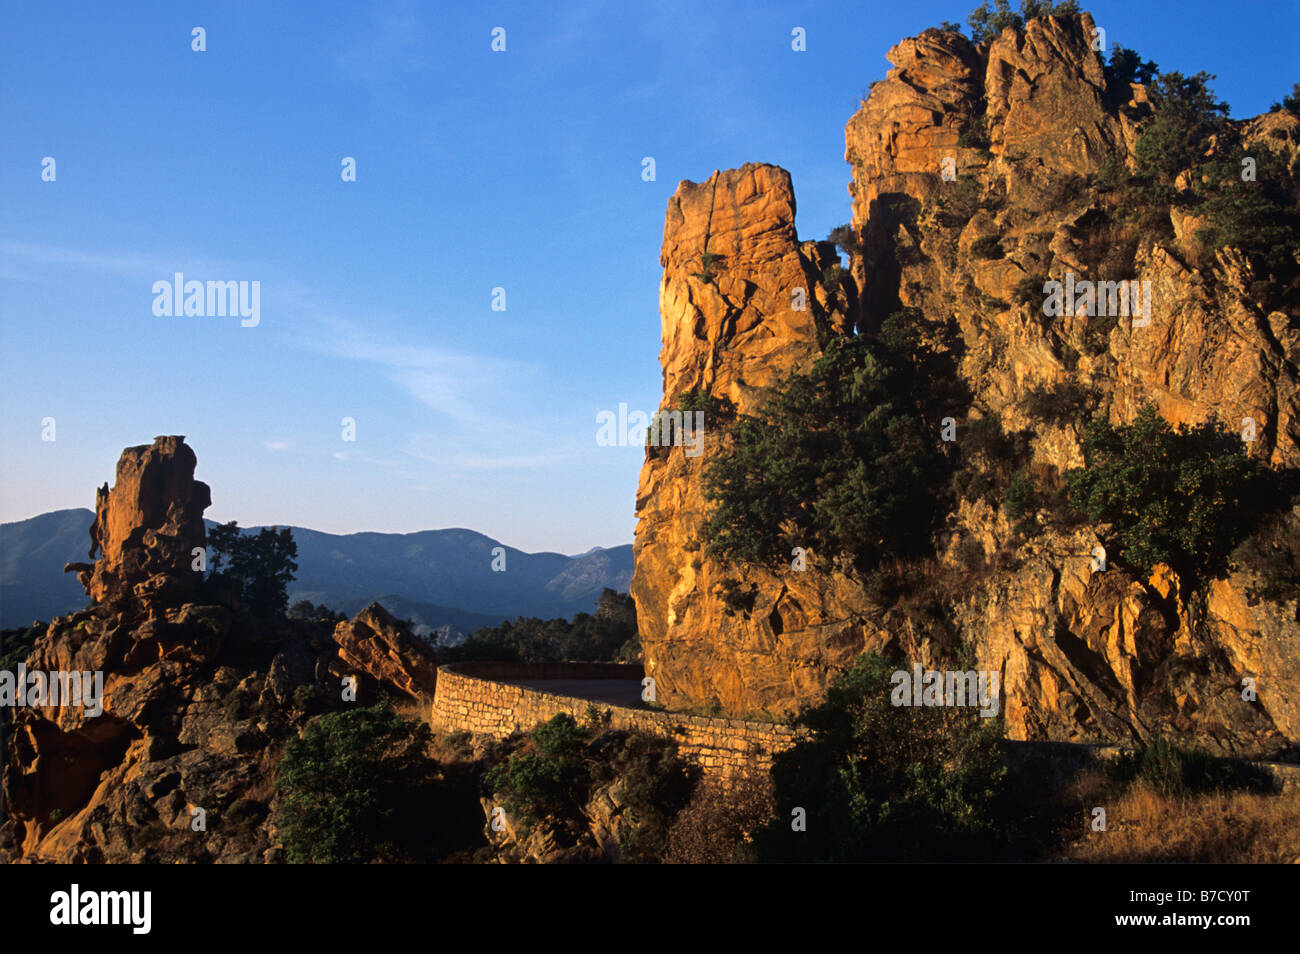 Rocky Outcrops Lit By Evening Light in the Calanches of Piana, a natural World Heritage Site, Corsica, France Stock Photo